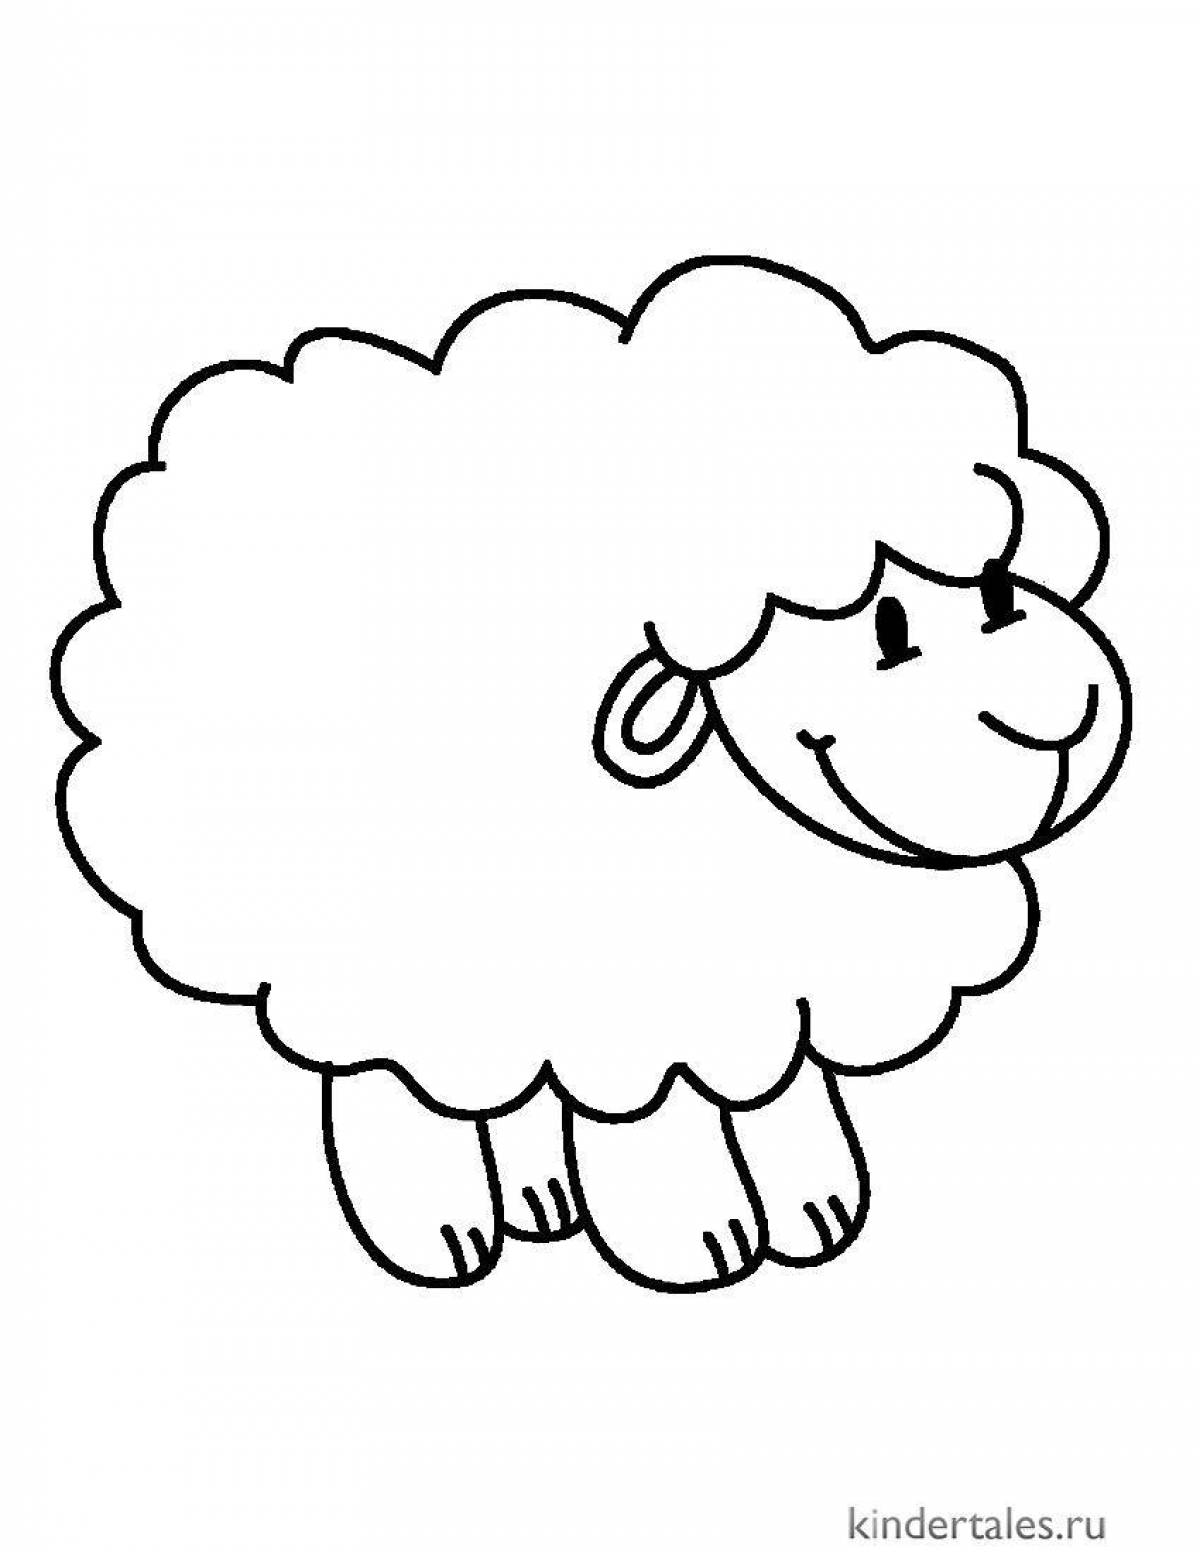 Crazy Sheep Coloring Page for 5-6 year olds